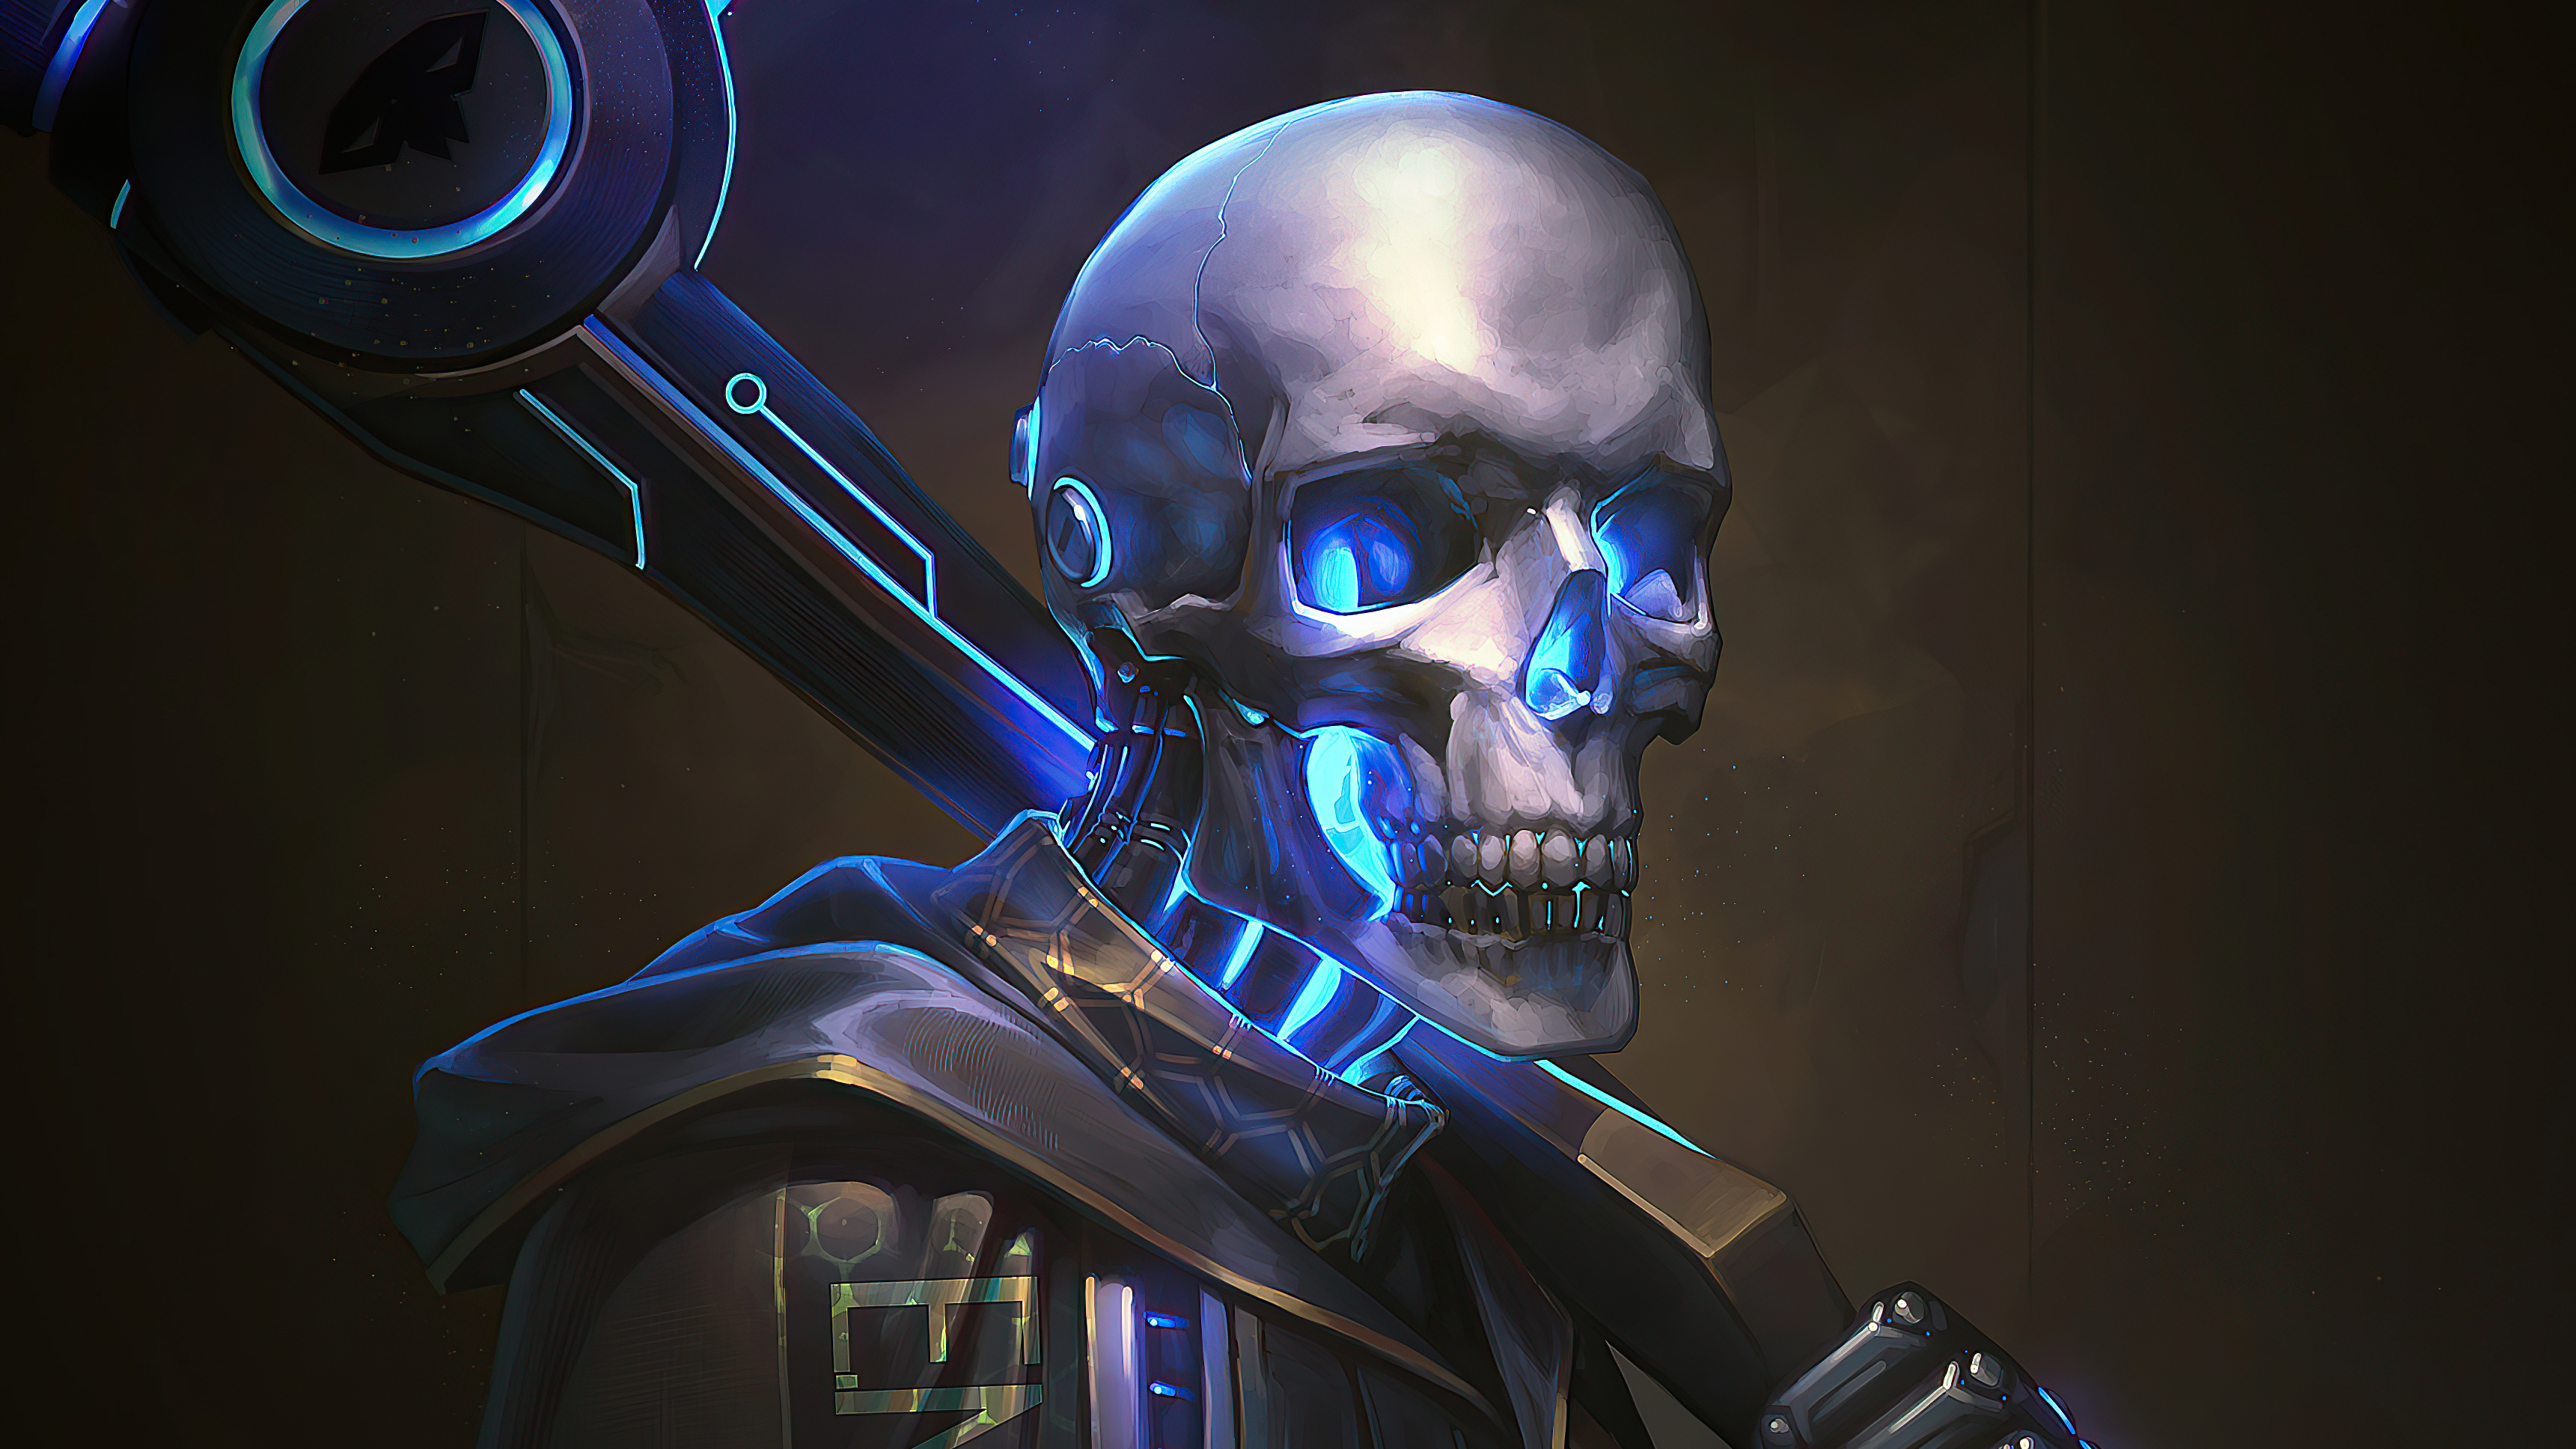 Skull Cyber Punk, HD Artist, 4k Wallpaper, Image, Background, Photo and Picture